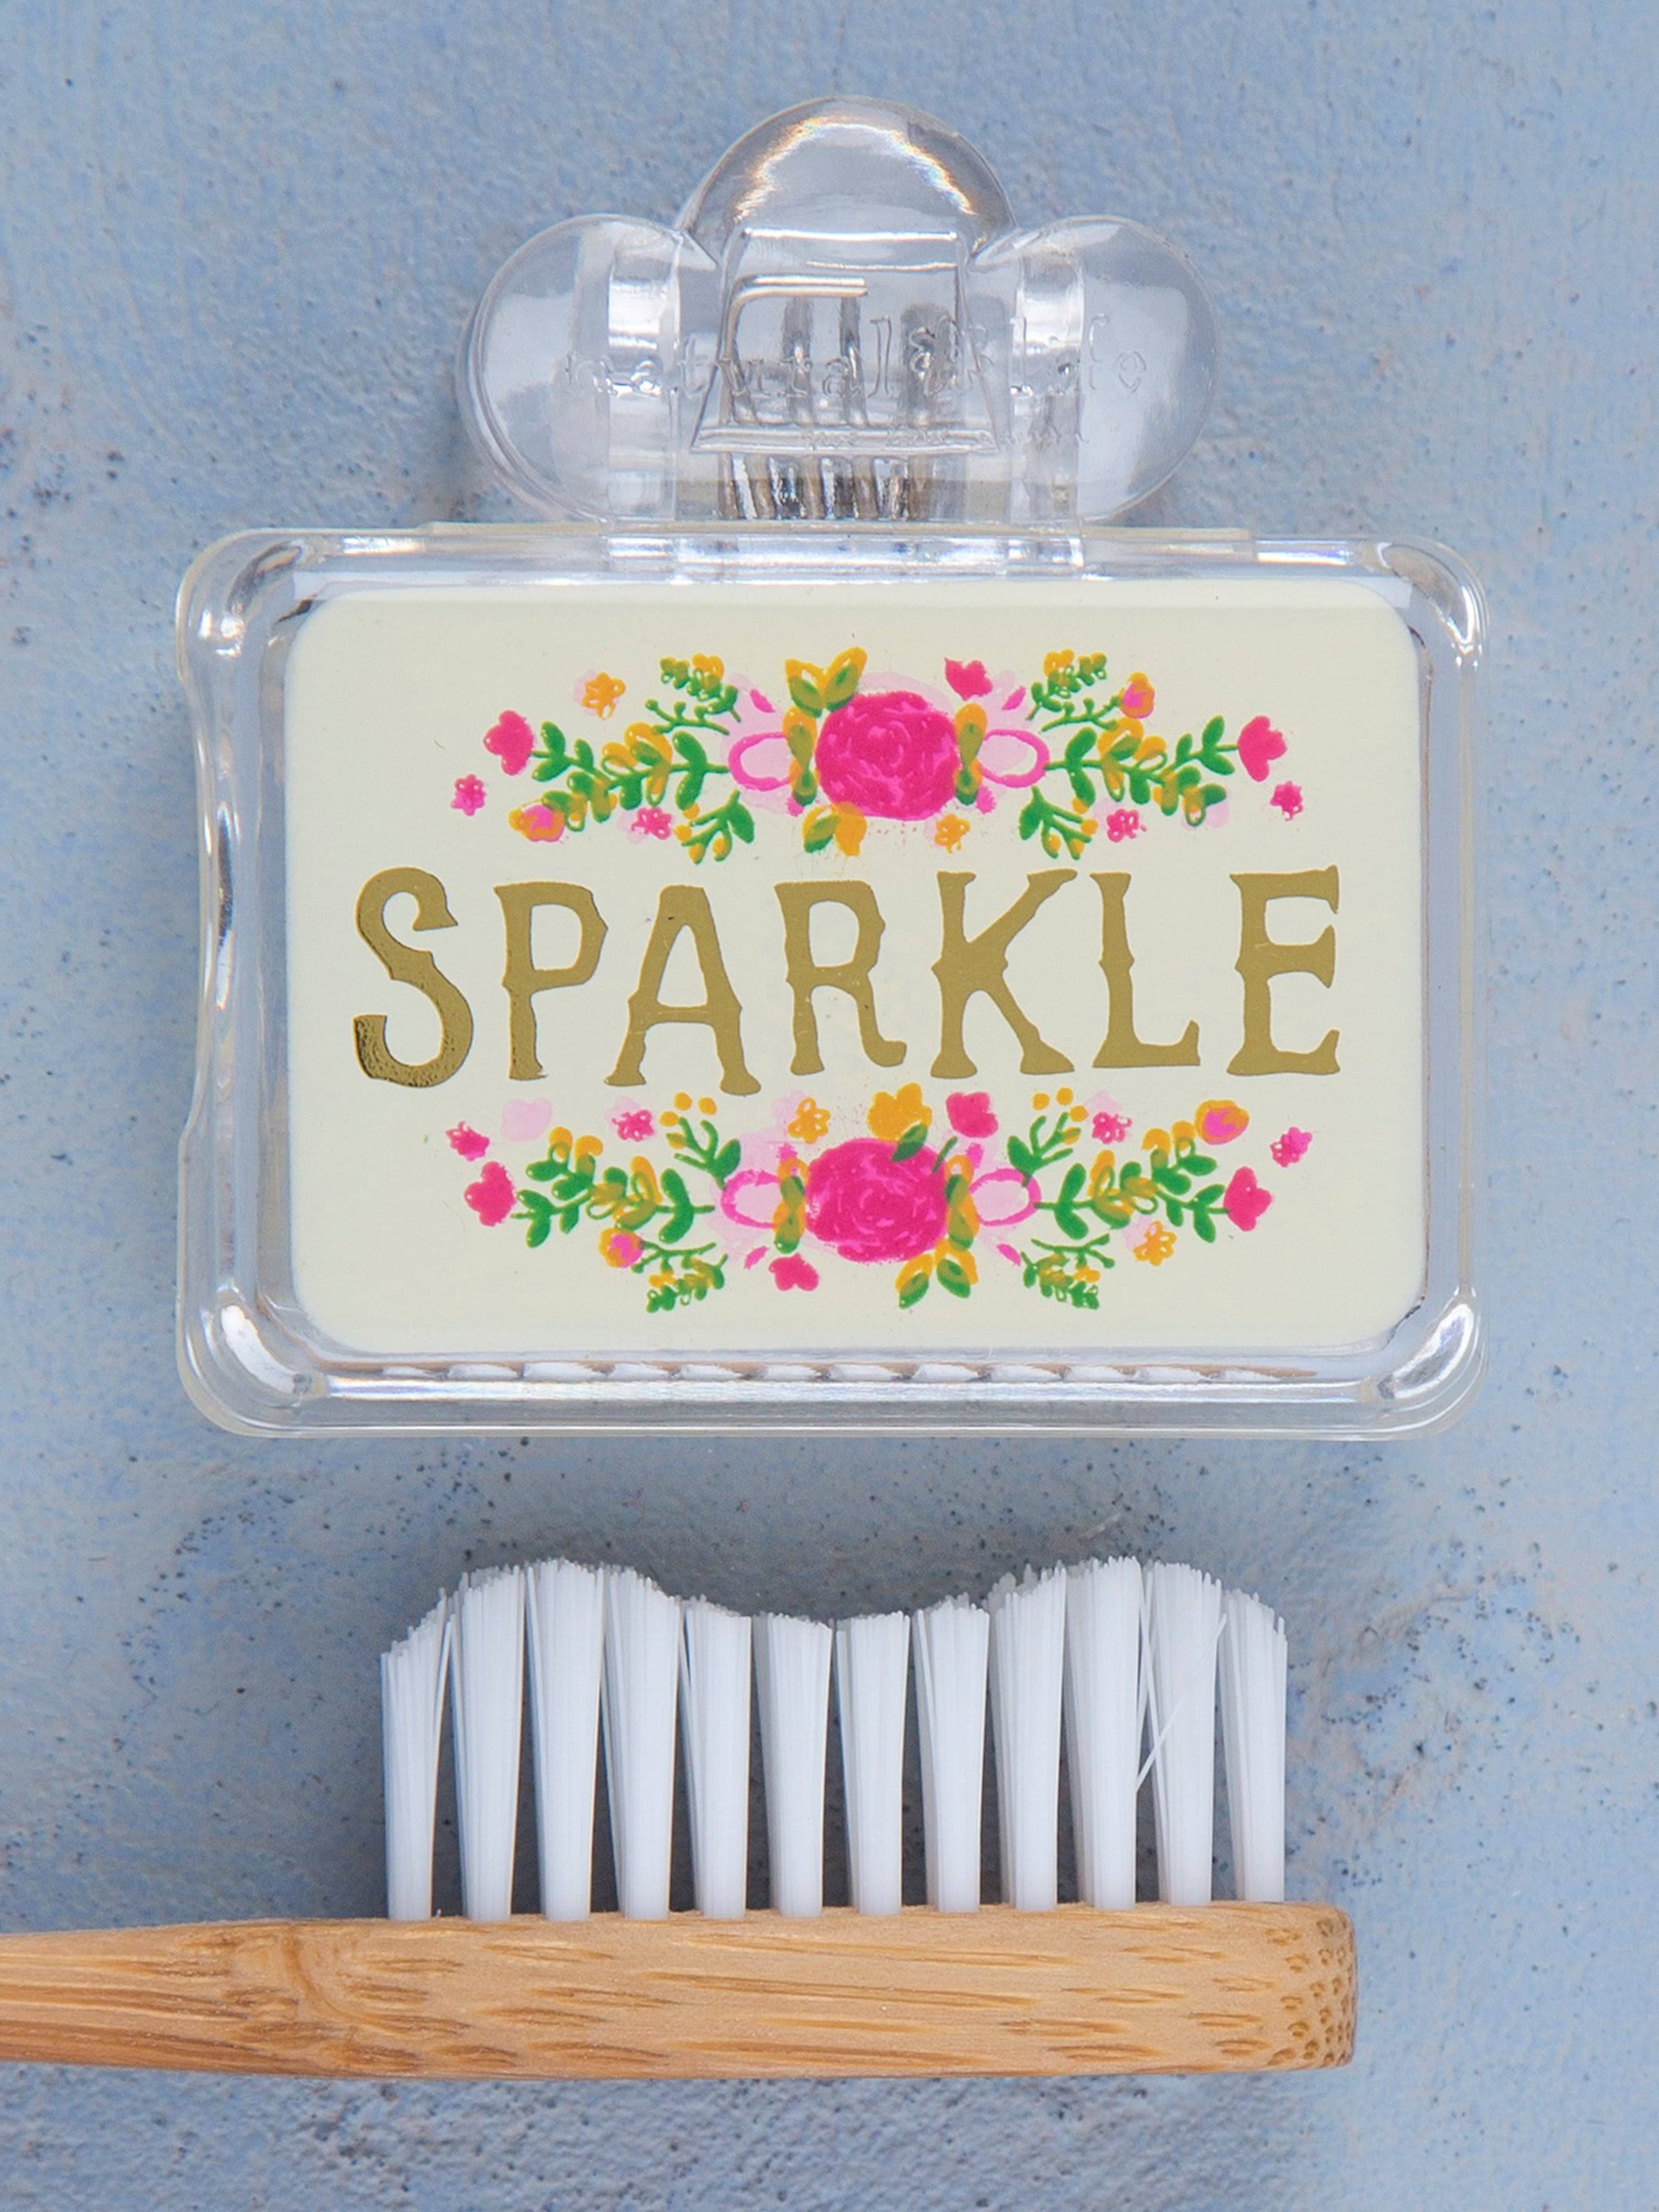 Natural Life: Toothbrush Cover - Sparkle